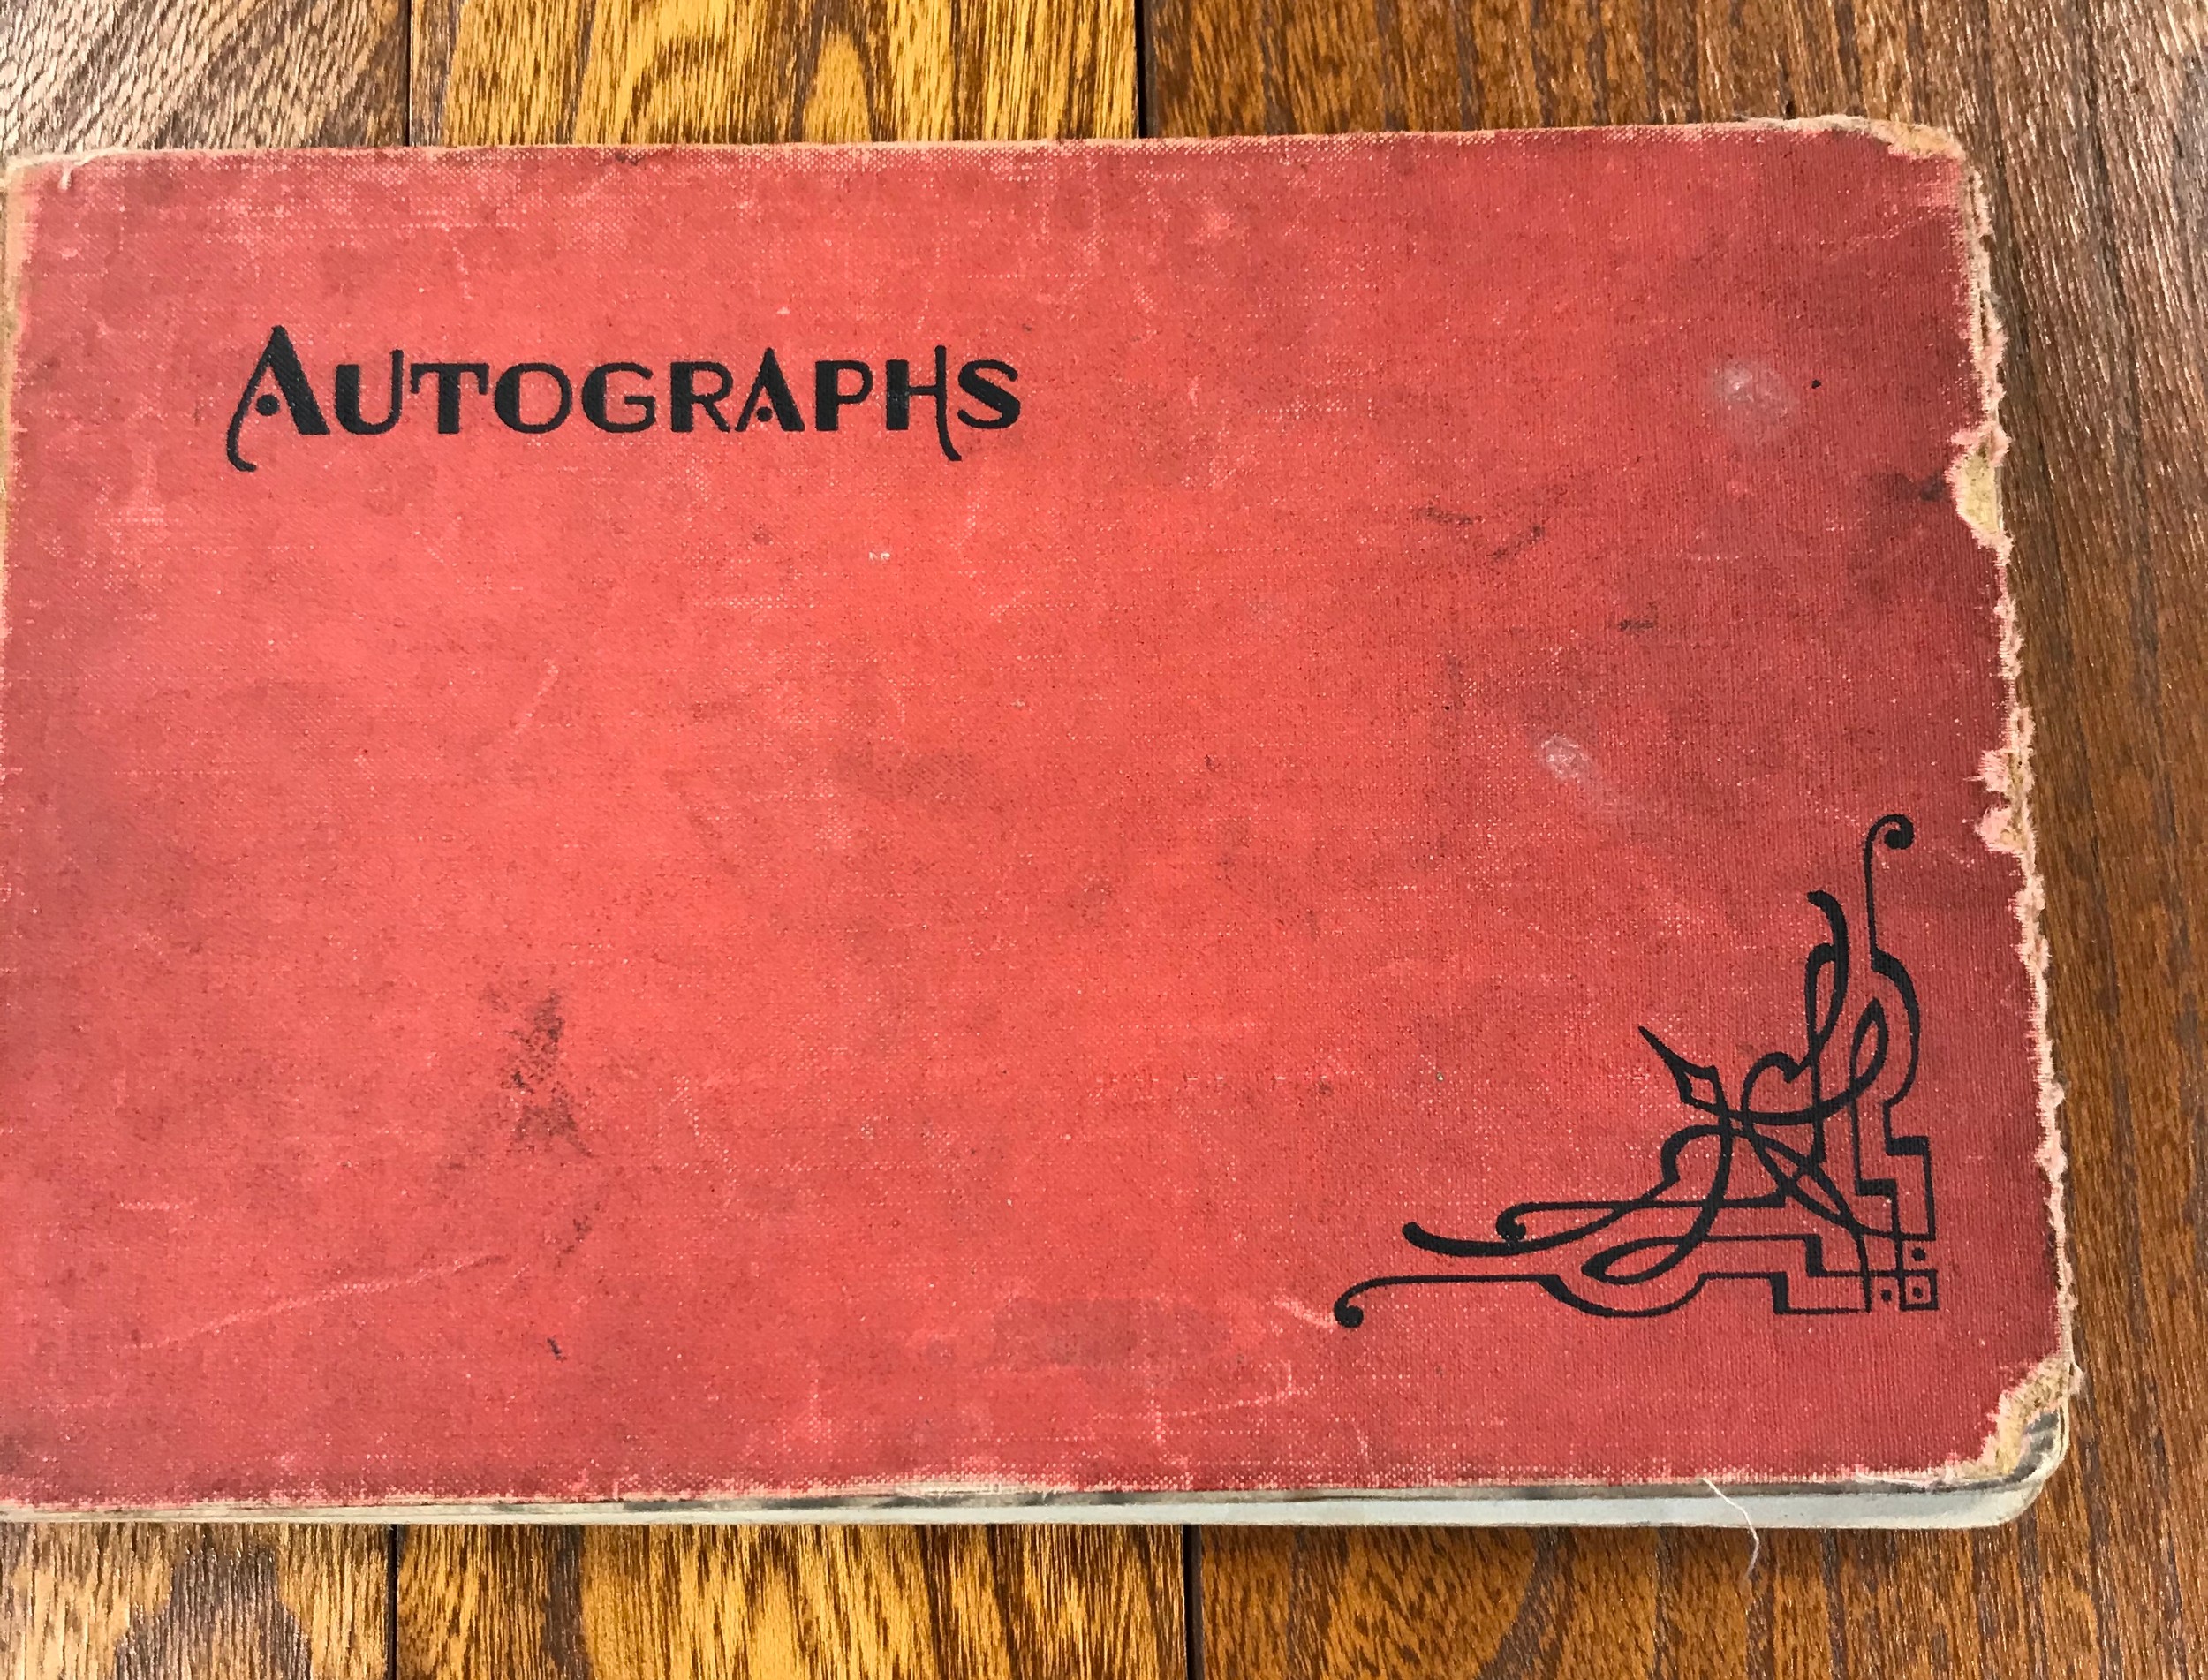 Vintage Autograph book depicting various poems, illustrations, quotes dated 1940's belonging to Miss